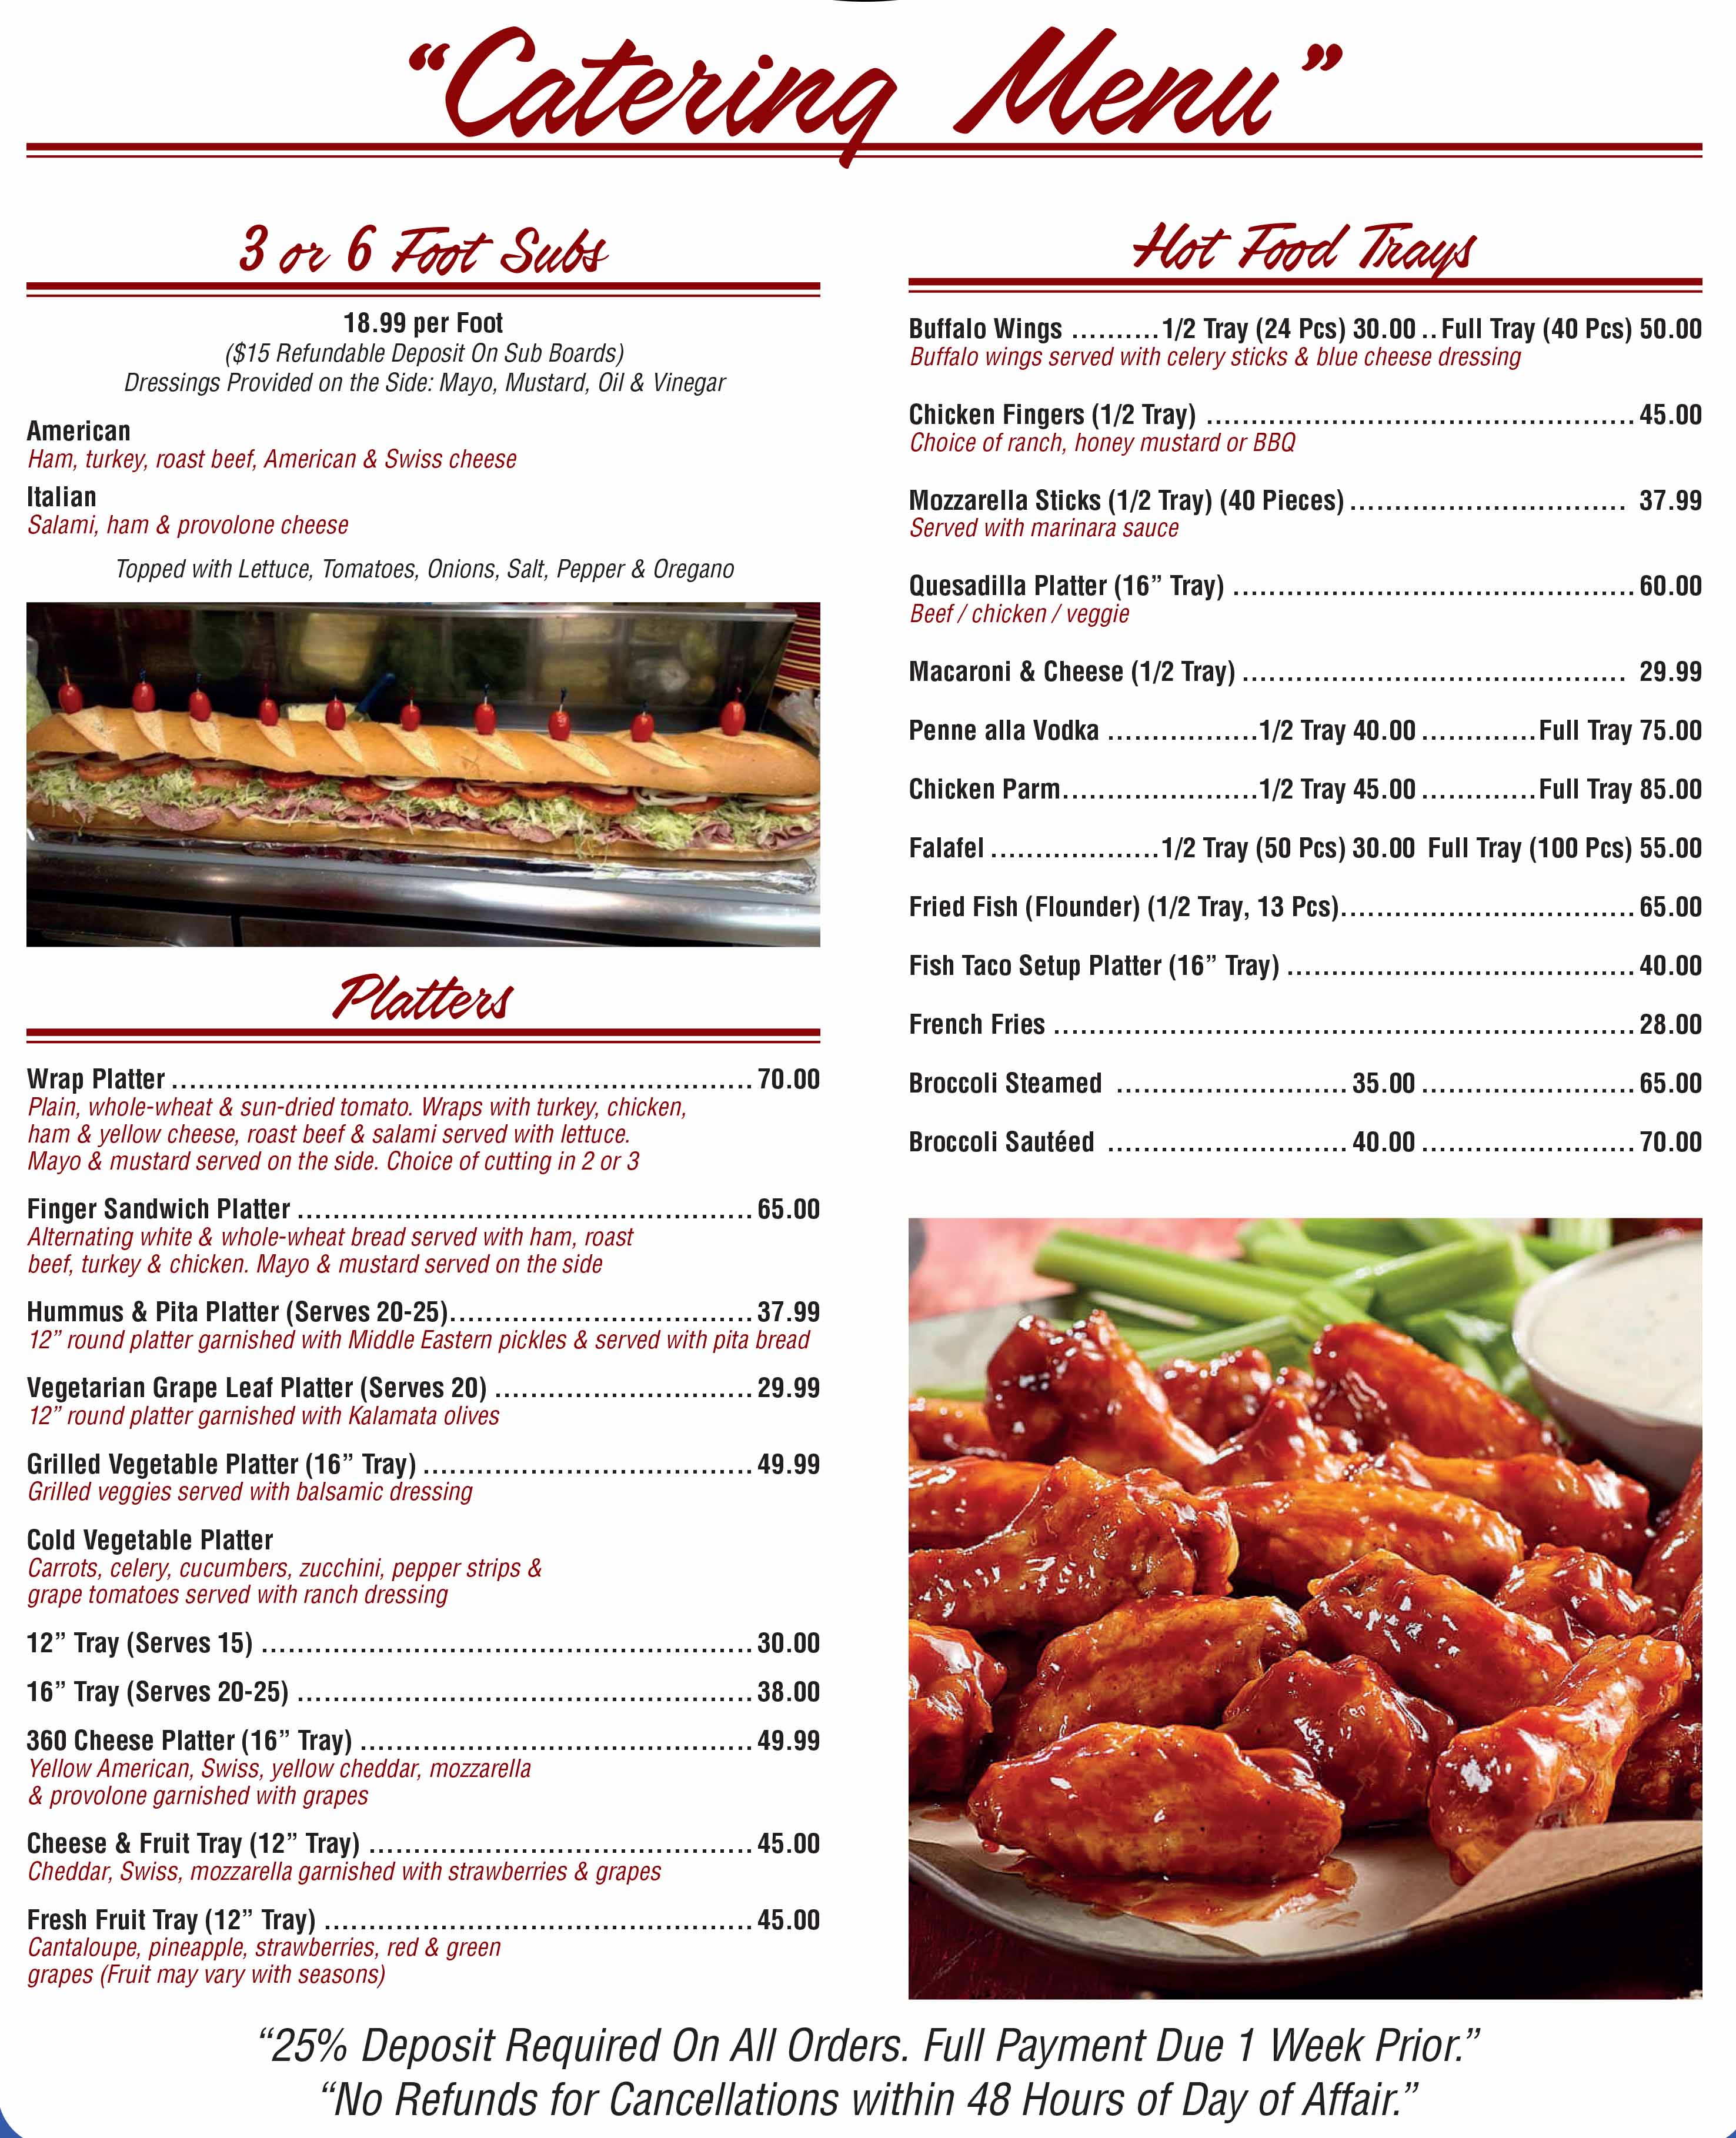 Hot Food - Subs - Platters